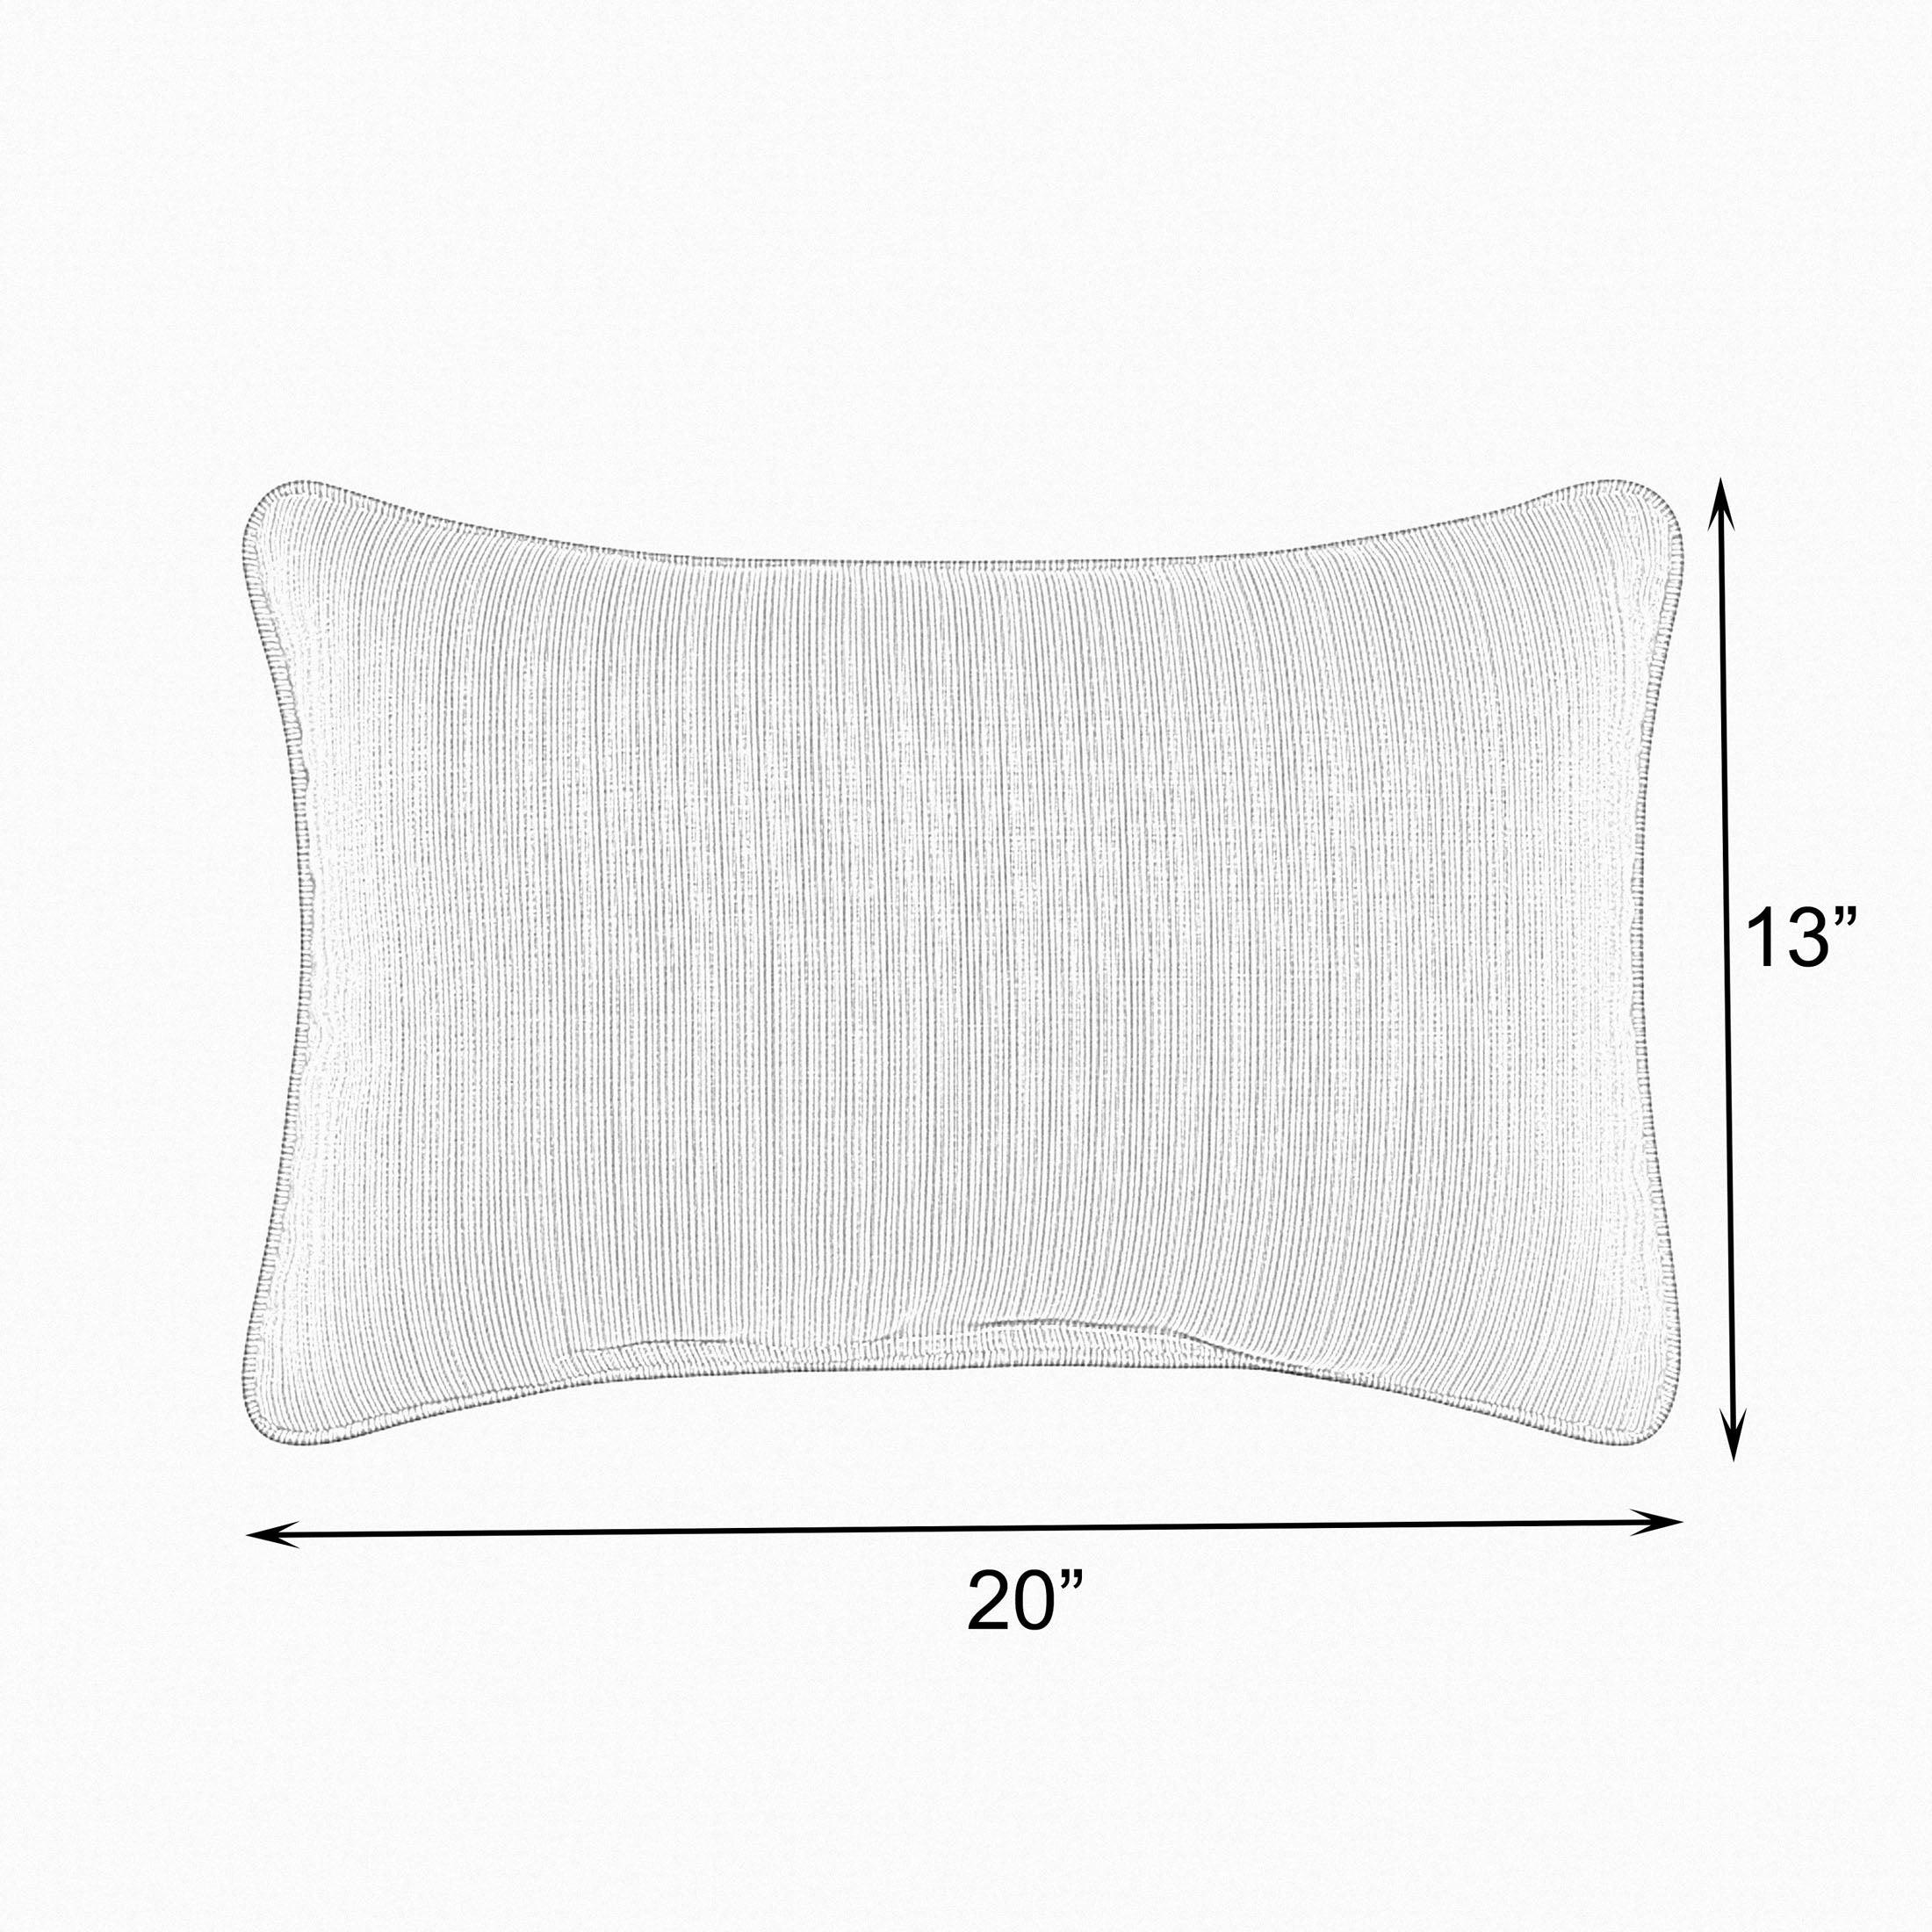 Sunbrella Pillow with Double Petite Flange (Set of 2) - Sorra Home